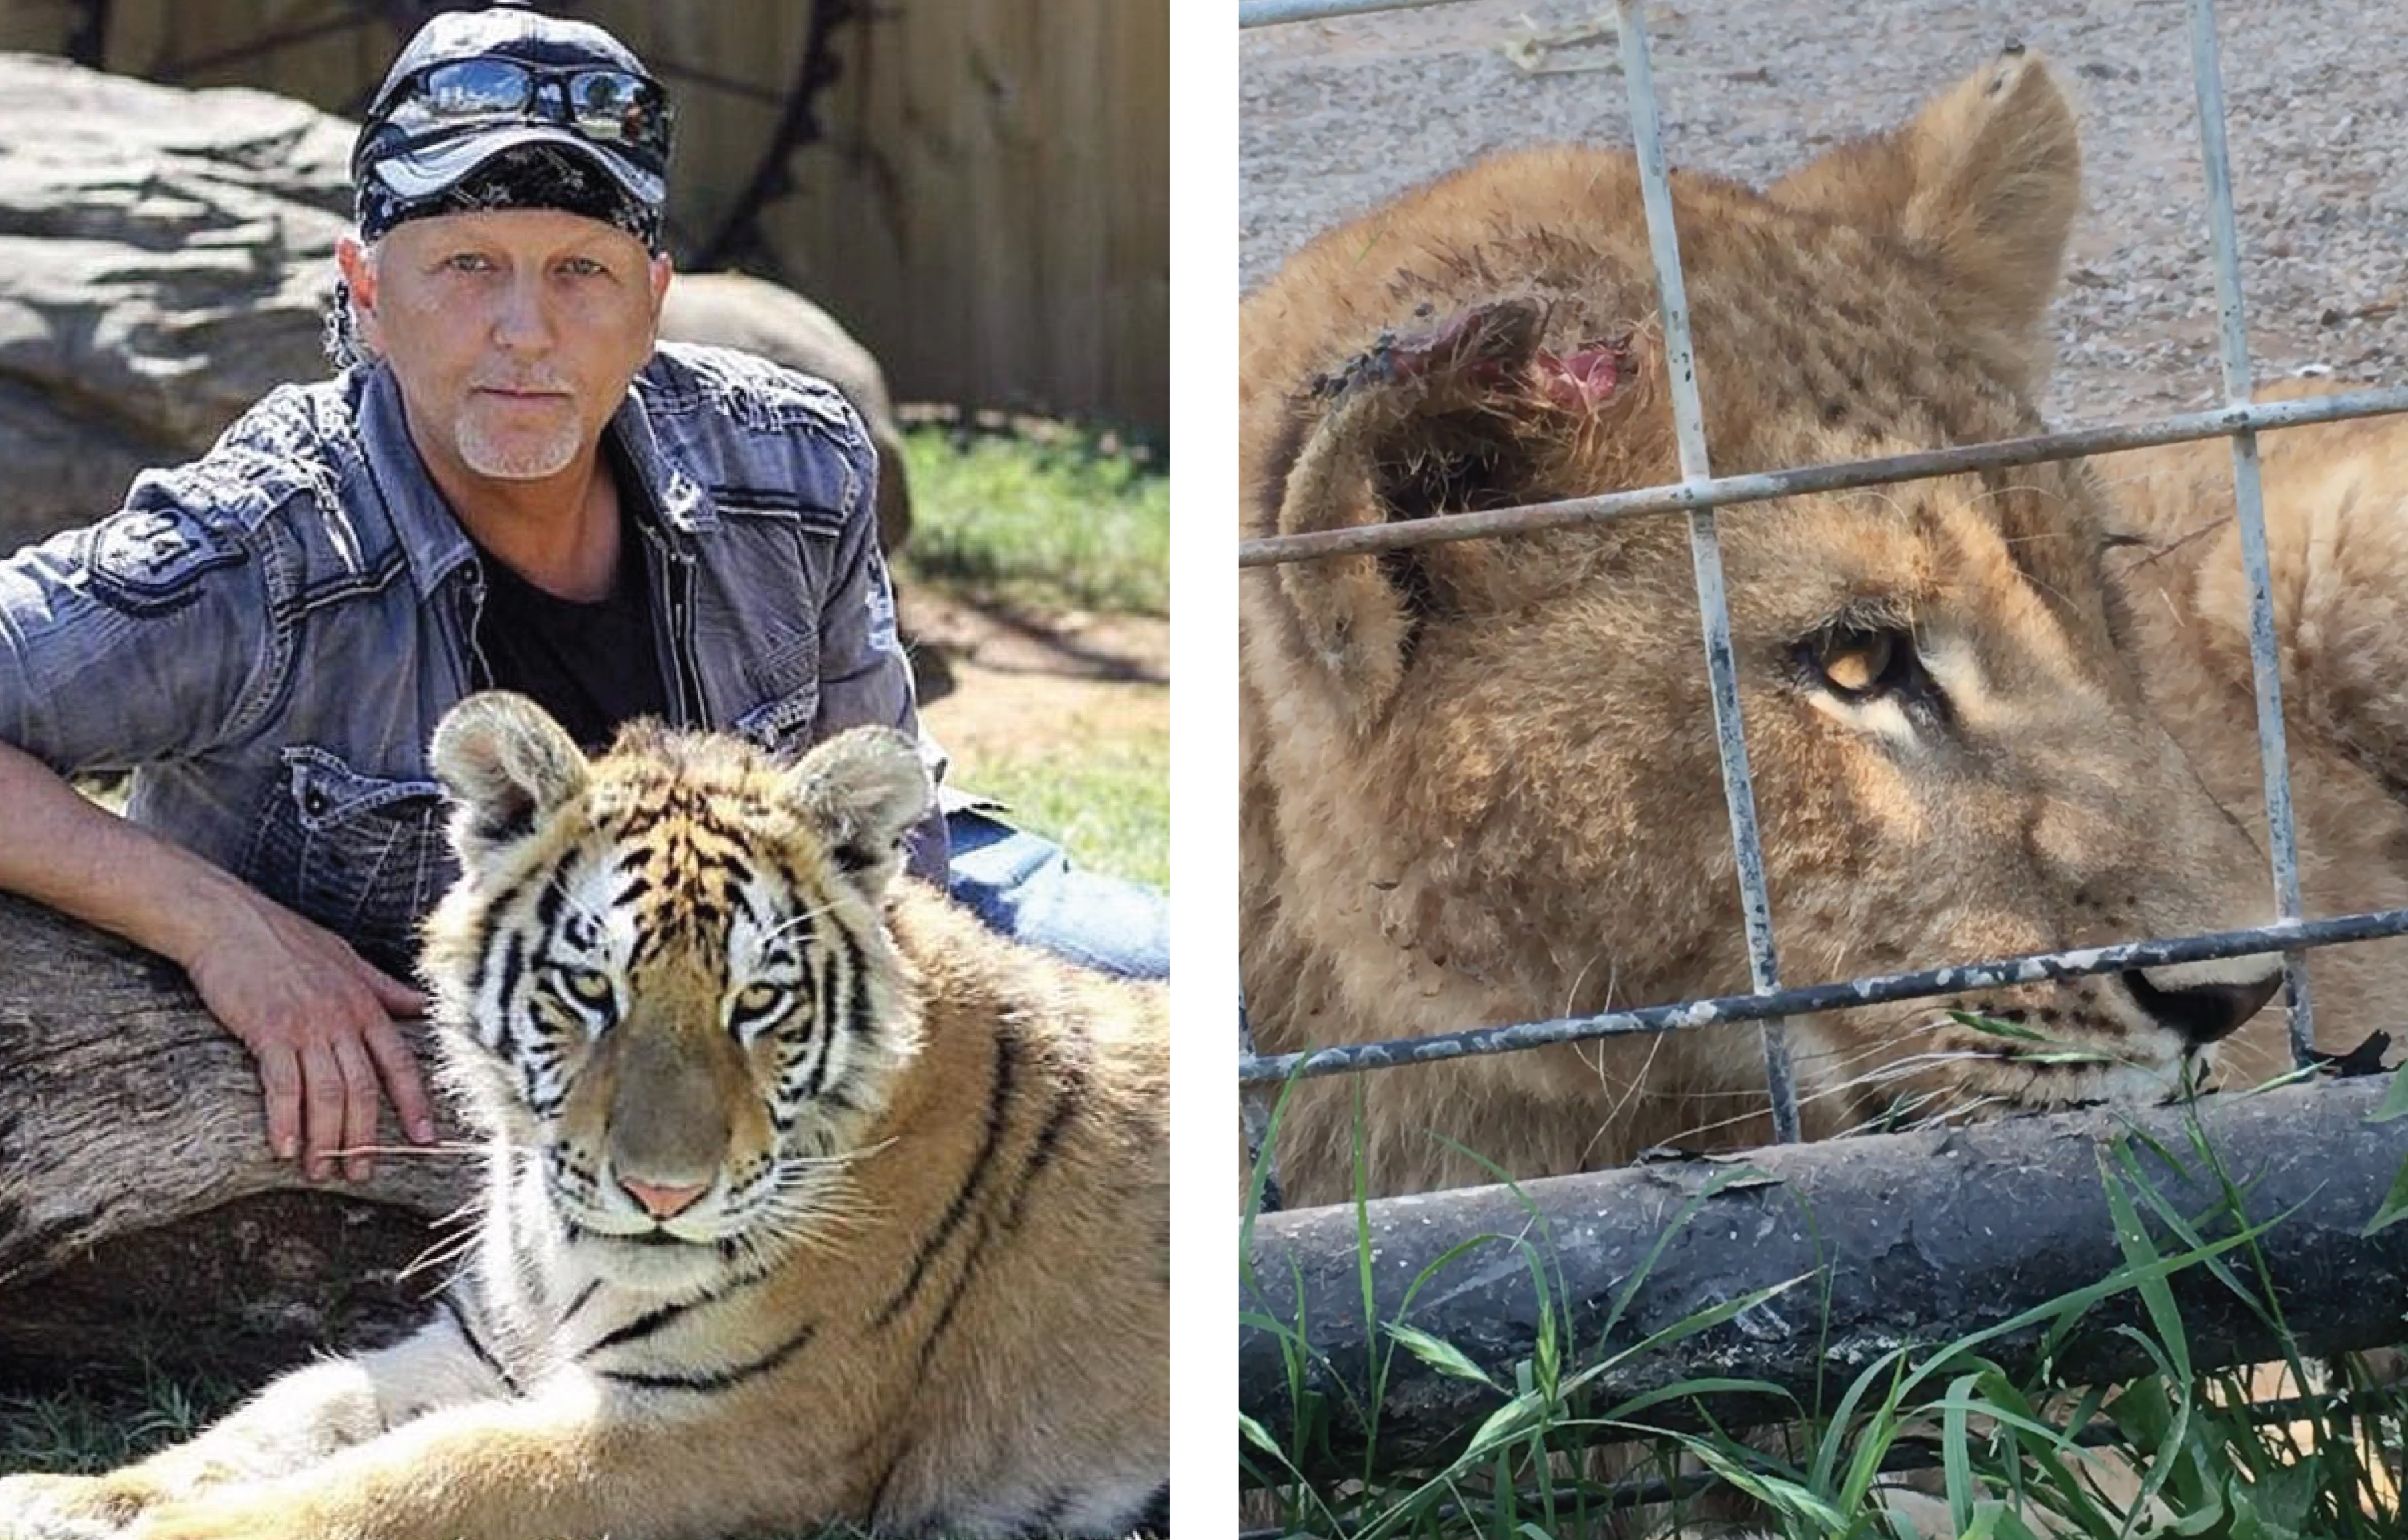 Tiger King Joe Exotic's former park now called 'zoo of horrors'